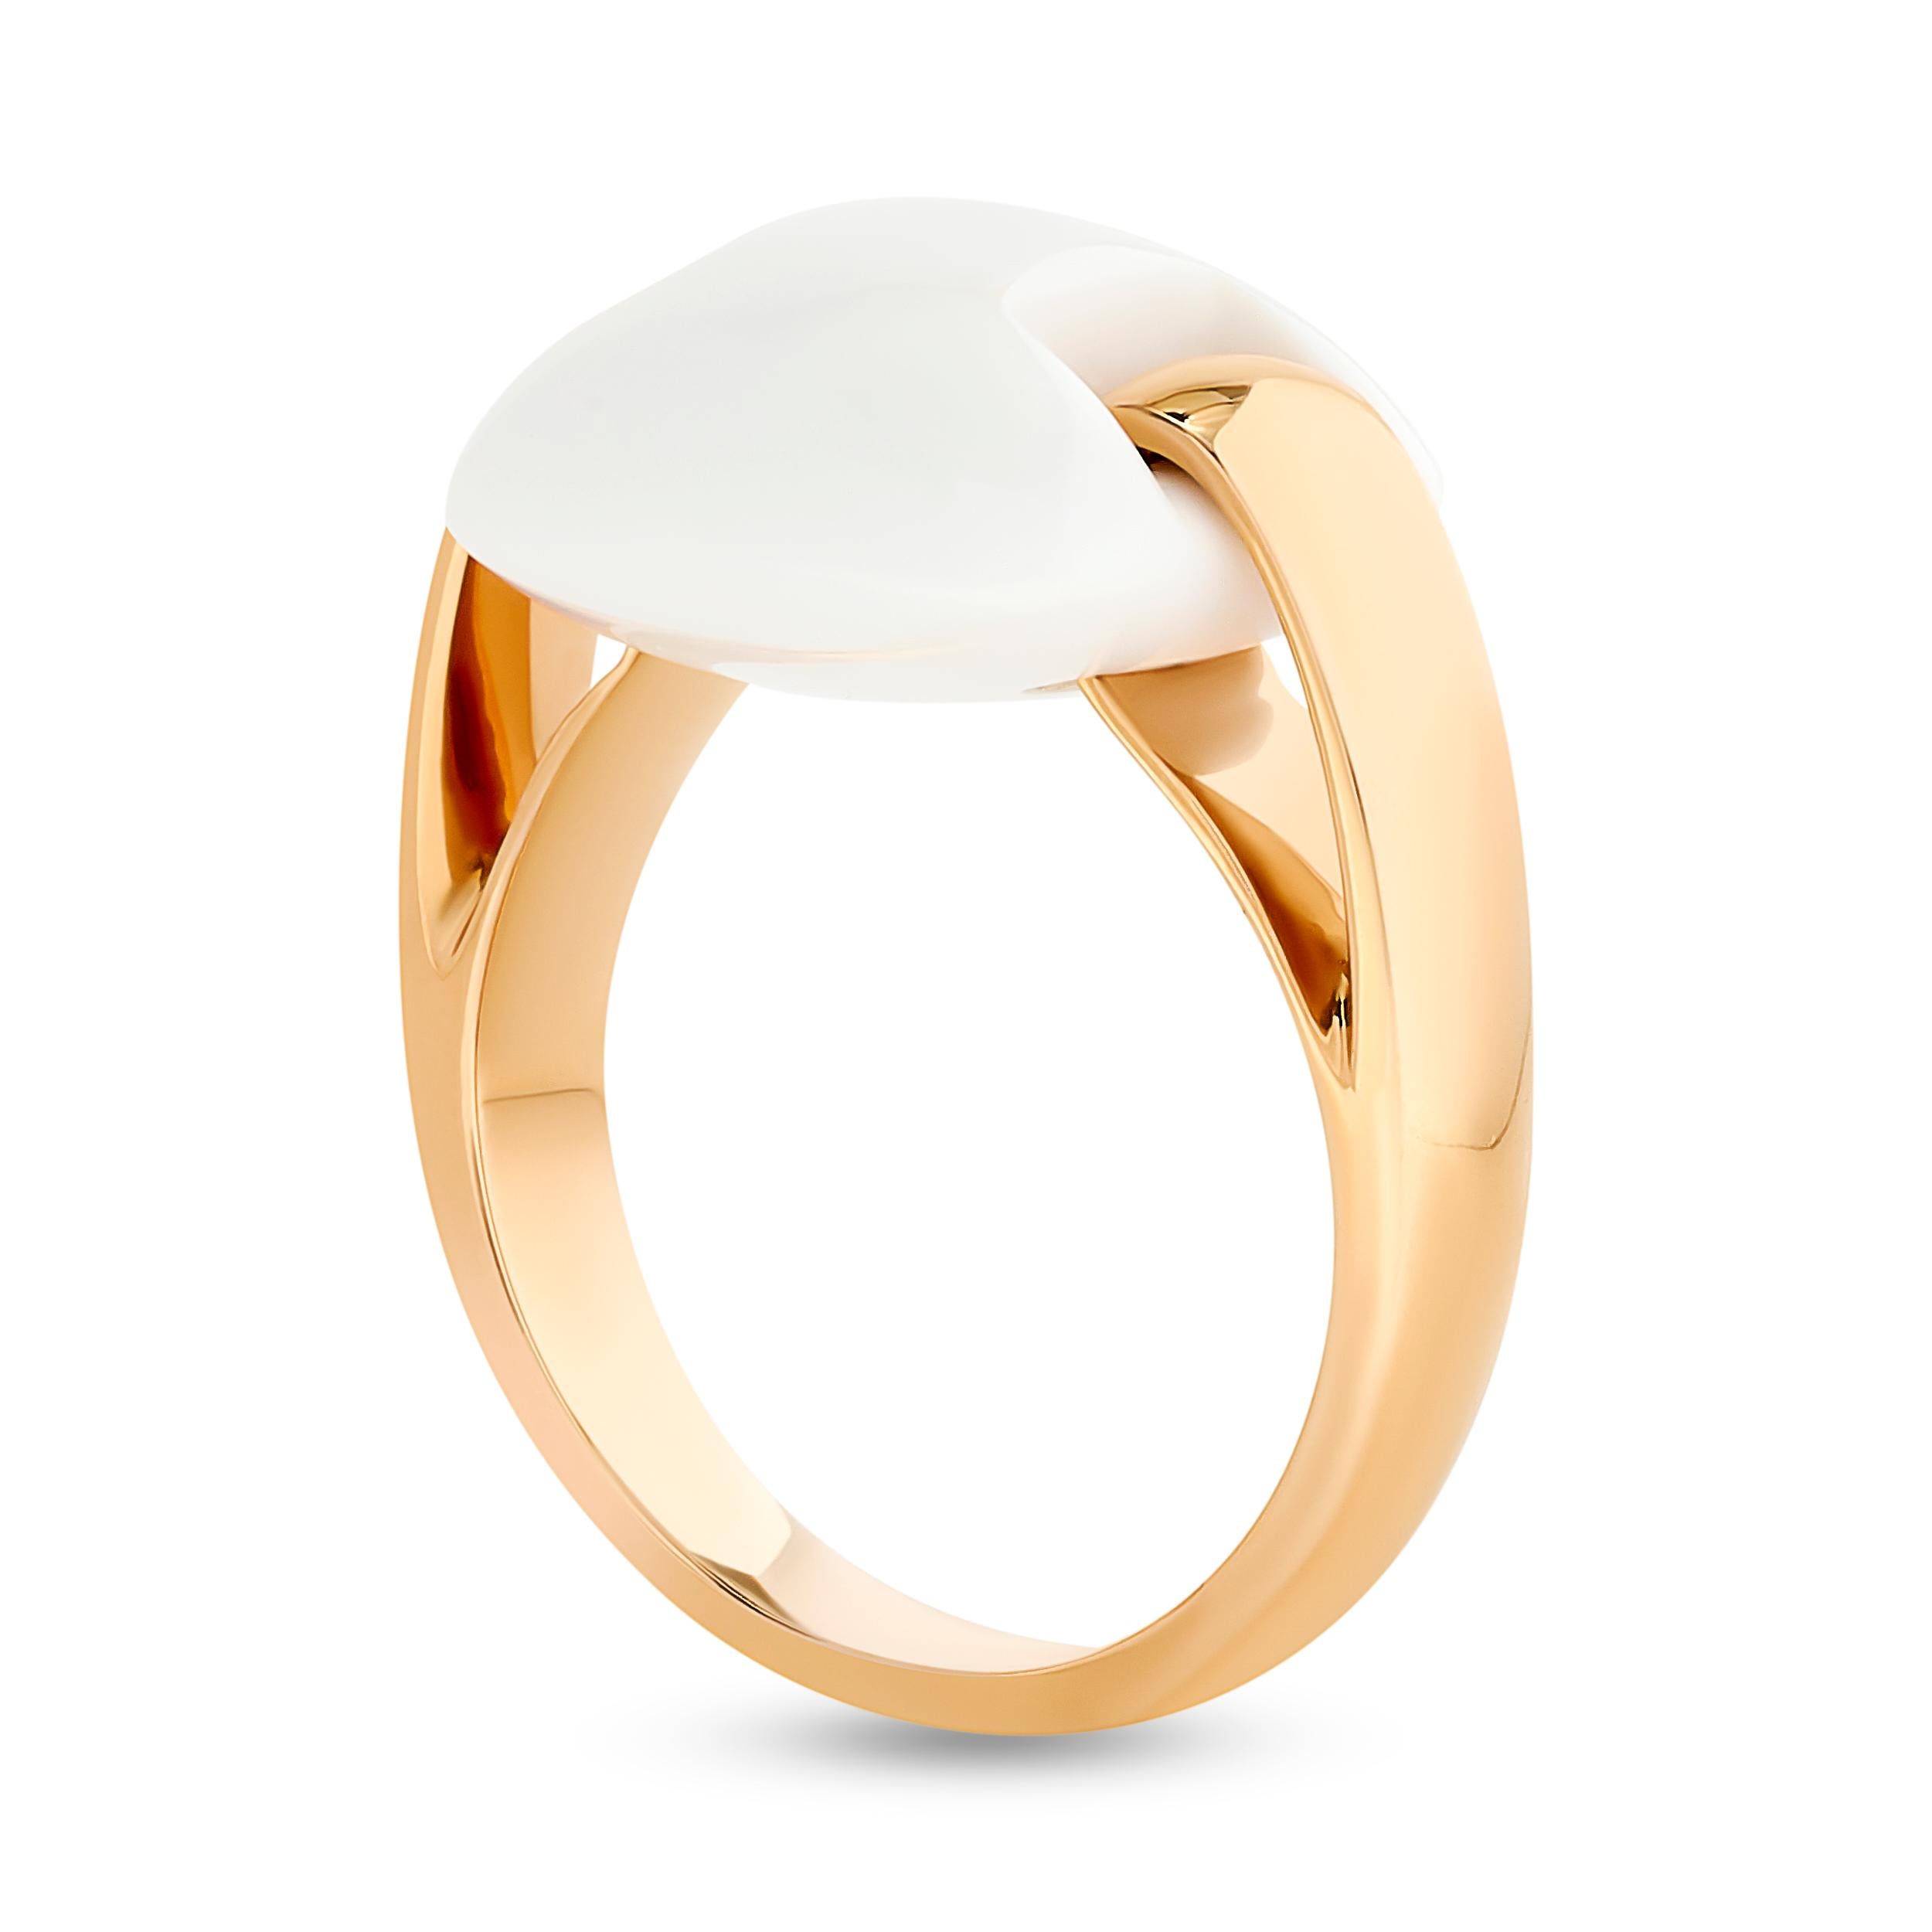 Crafted from luxurious 18k gold, the band is sleek and polished, showcasing Ferragamo's signature craftsmanship. 
The band interlocks with a white agate gemstone.

Ring size US 5.25
Signed with the Ferragamo and 18k stamps.
Ferragamo retail: $2,200